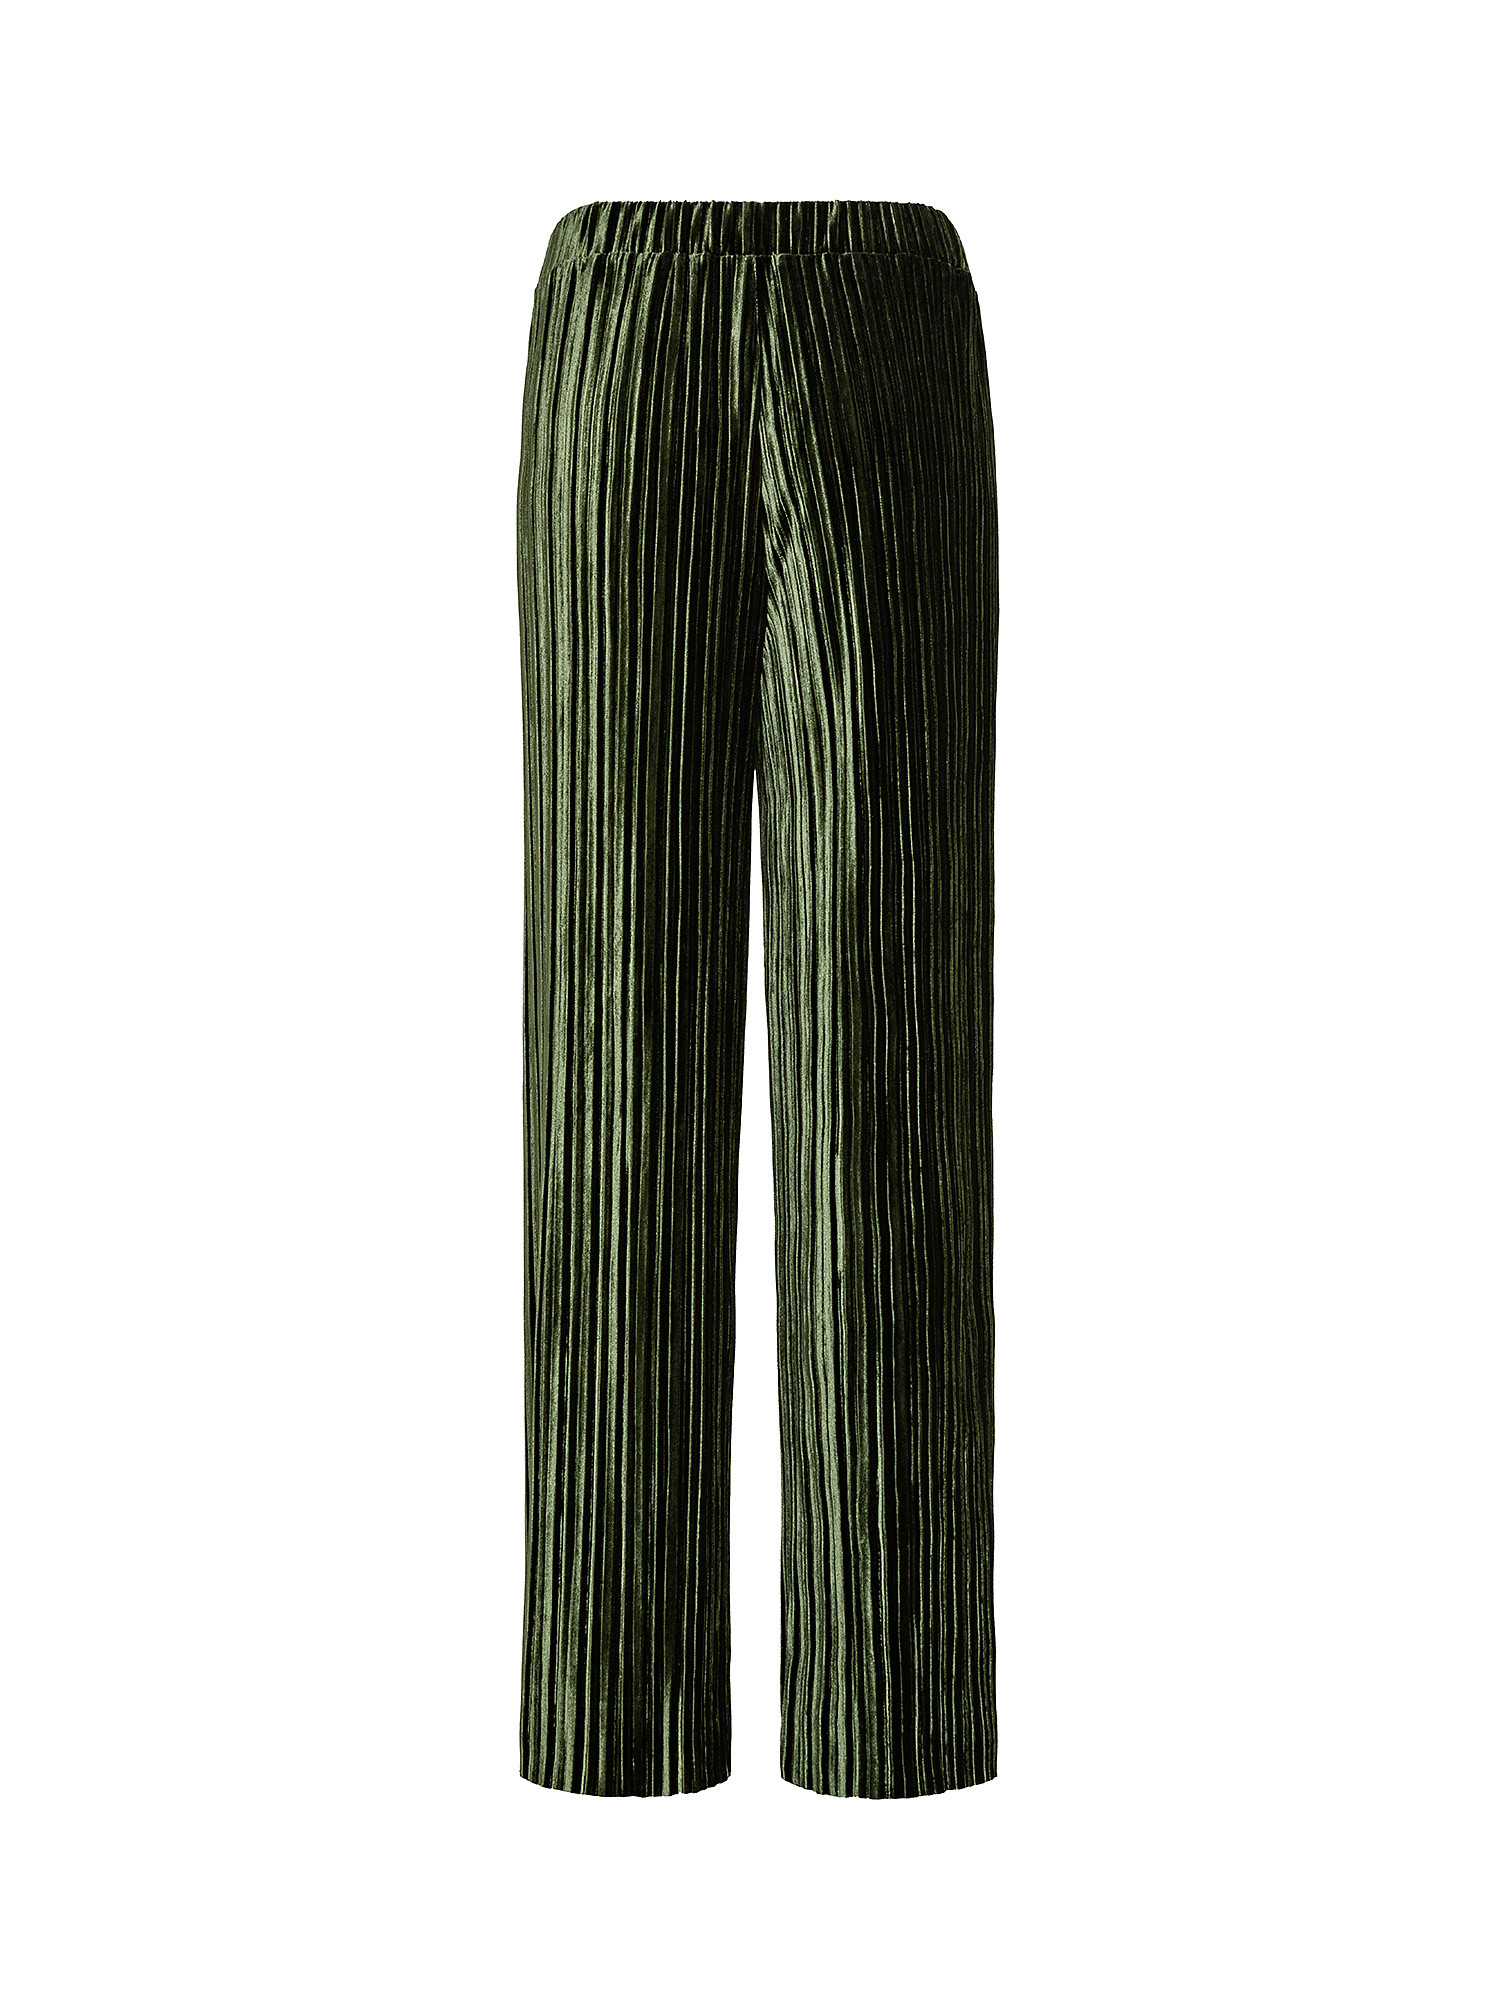 Pleated velor trousers, Green, large image number 1